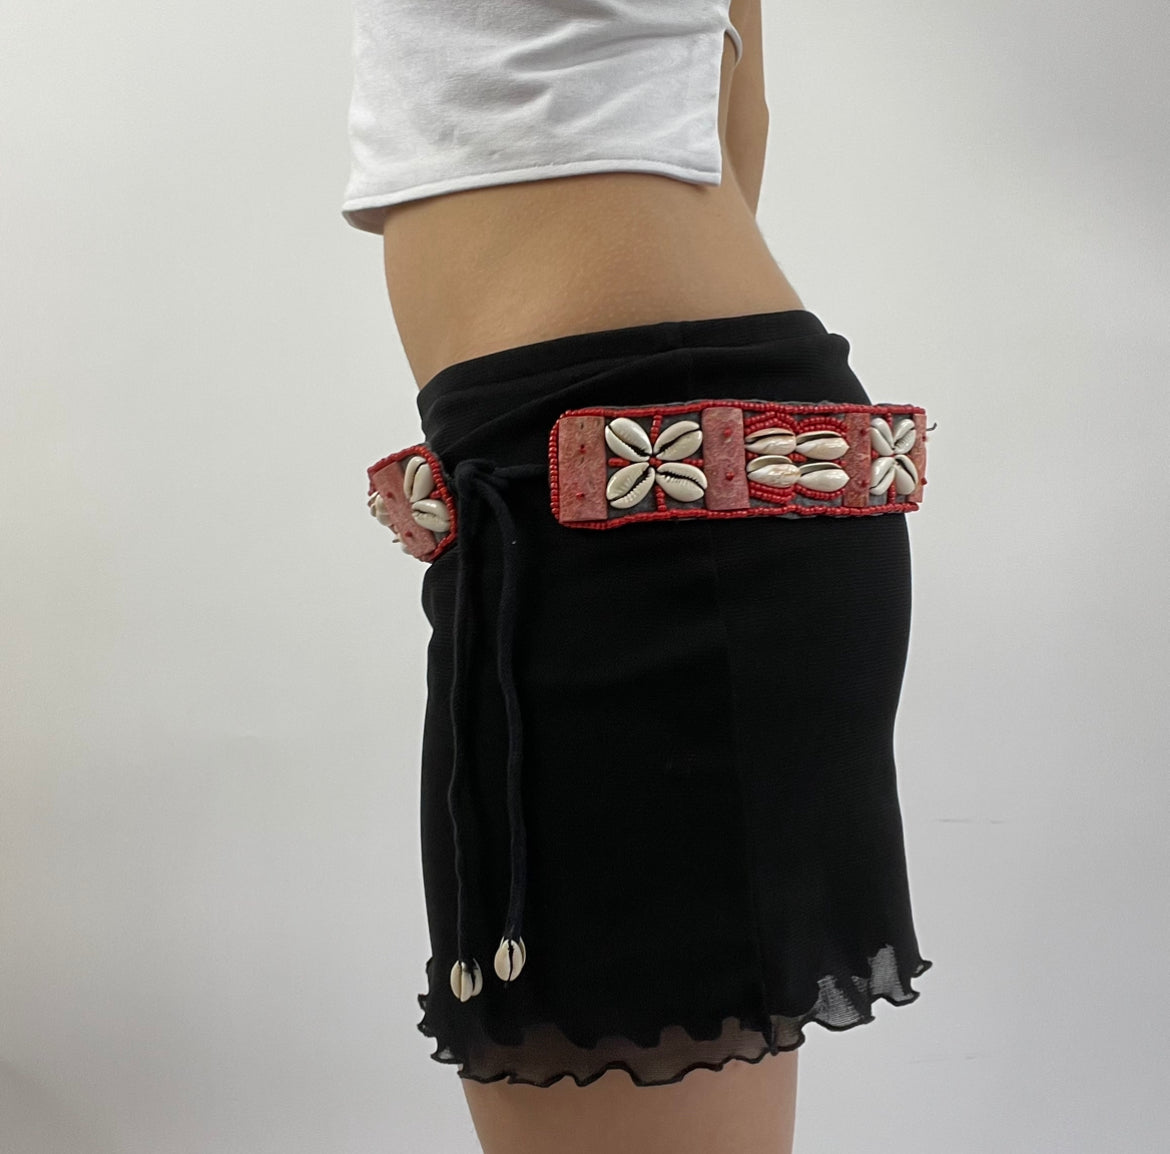 red and white shell belt